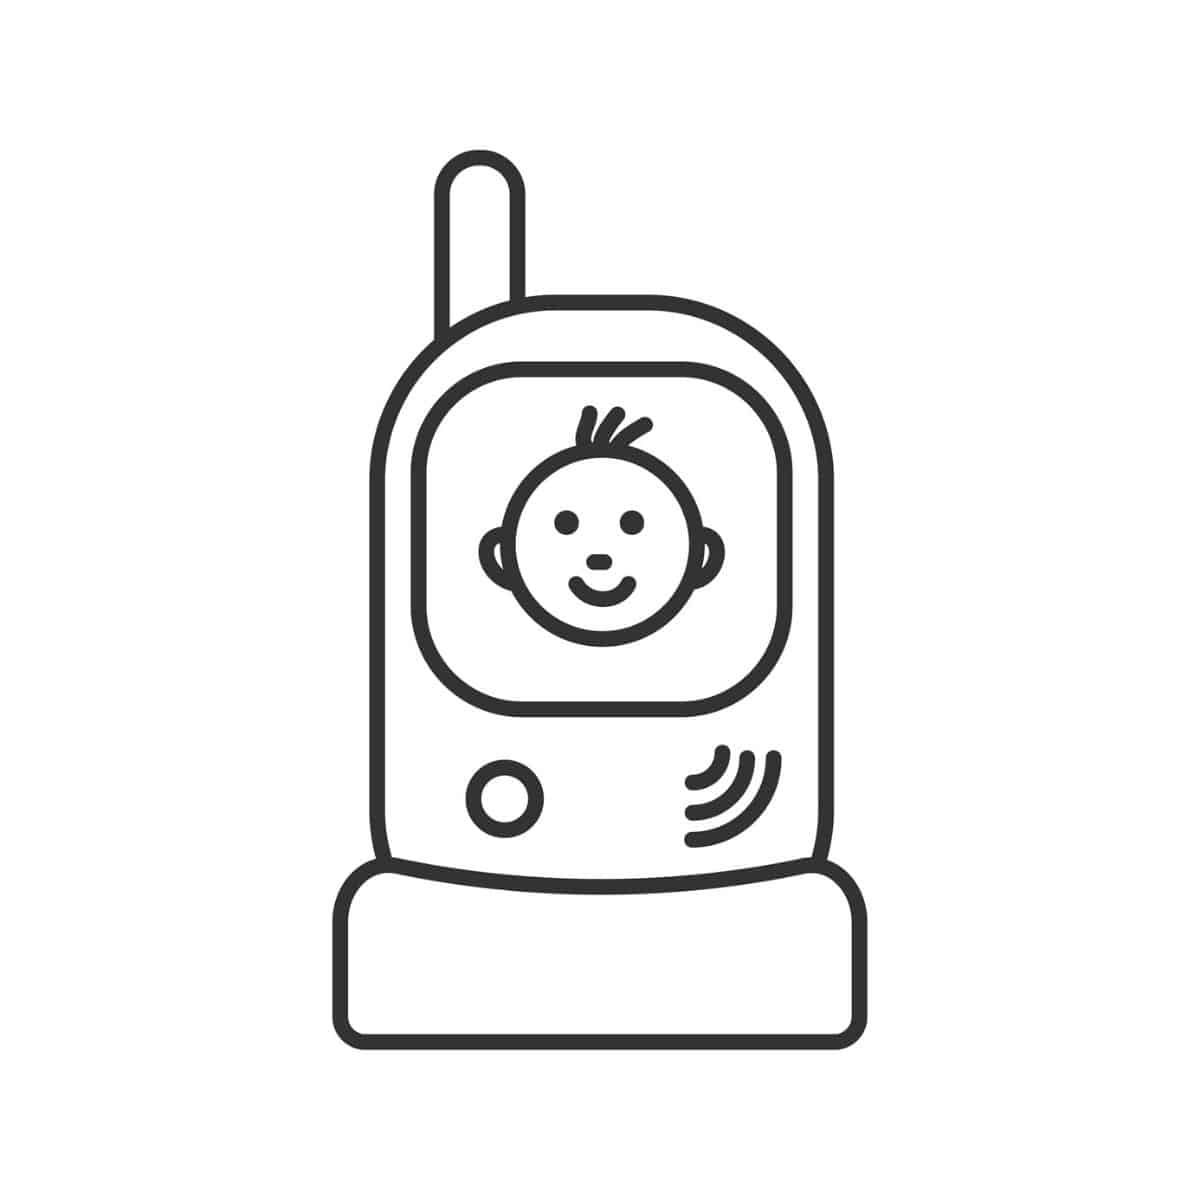 cartoon image of a baby monitor with smiling baby face